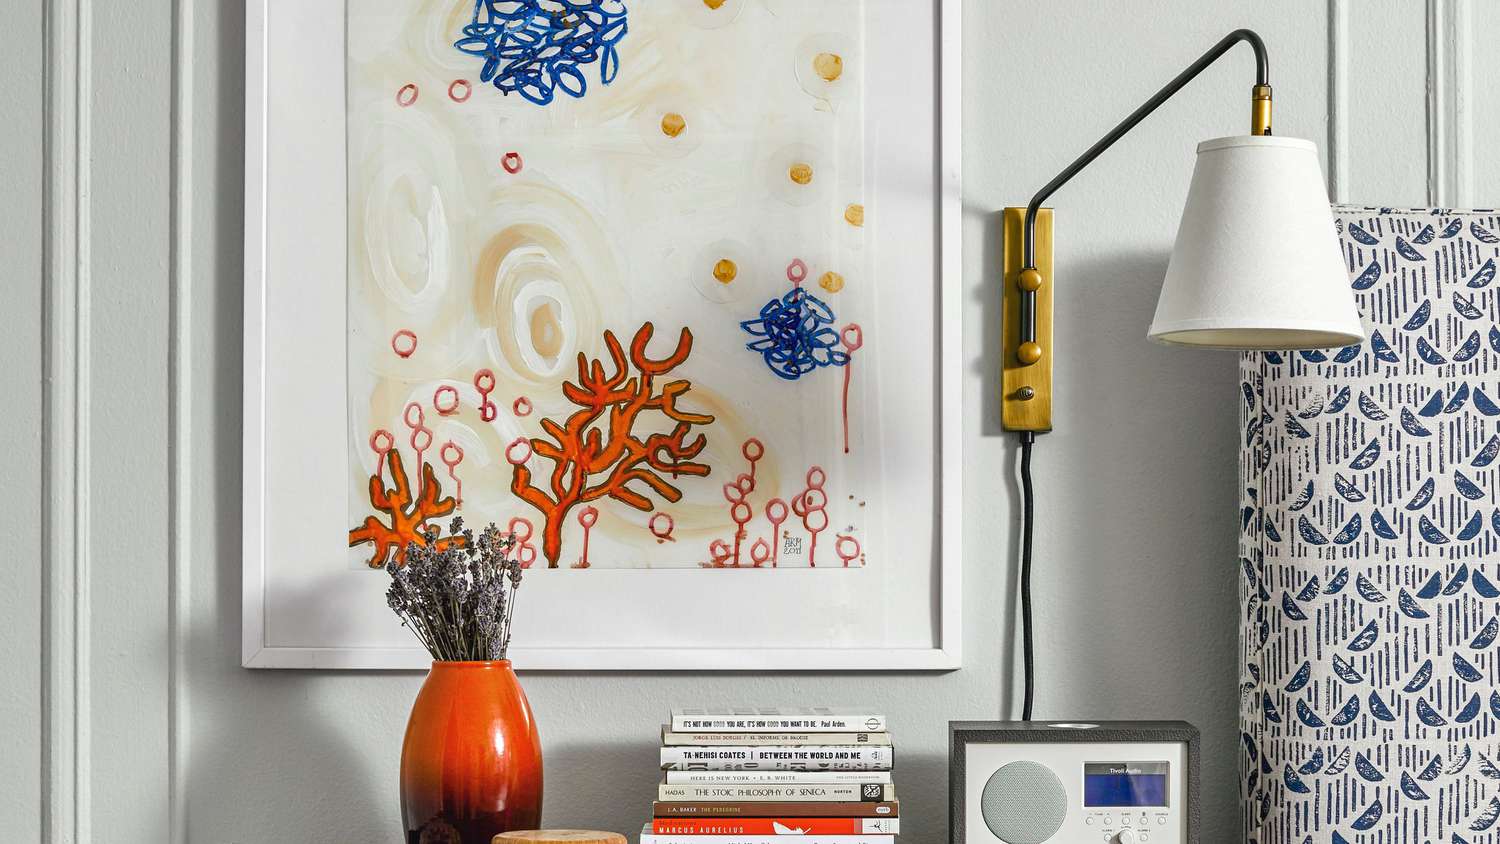 Colorful art hangs over a nightstand